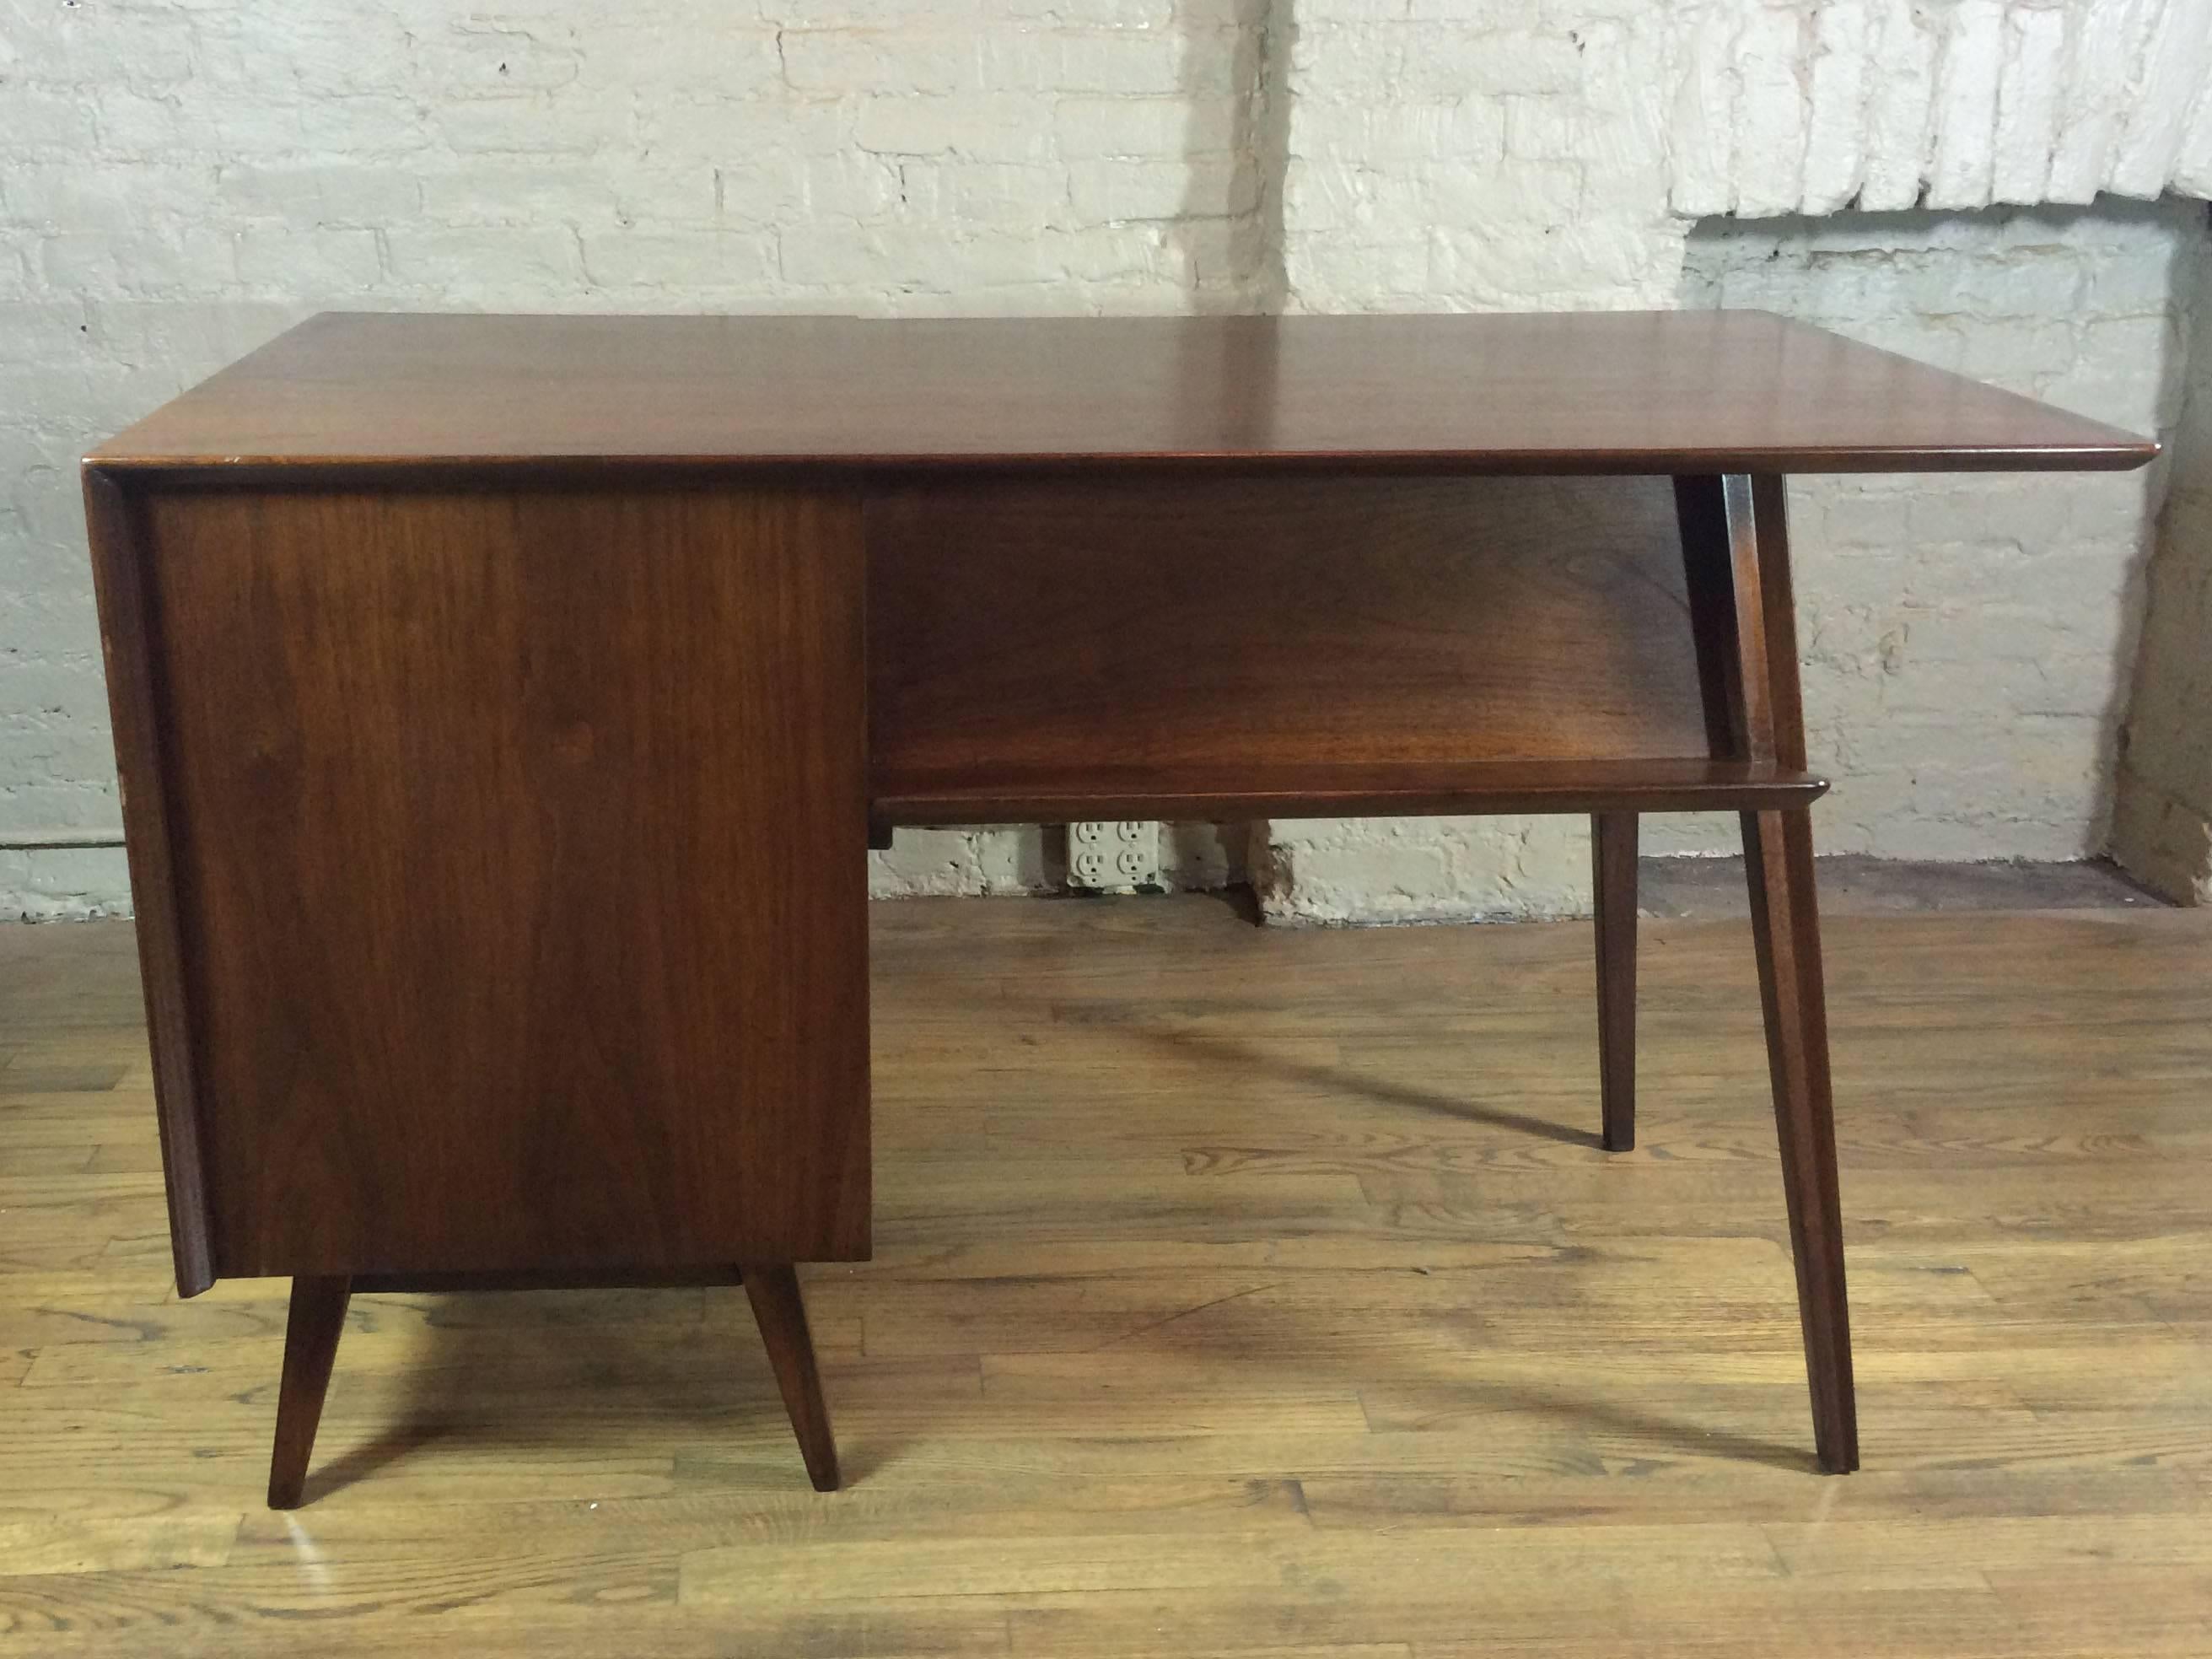 Mid-Century modern, solid walnut, single pedestal desk with display shelf on the back is stunning from all angles